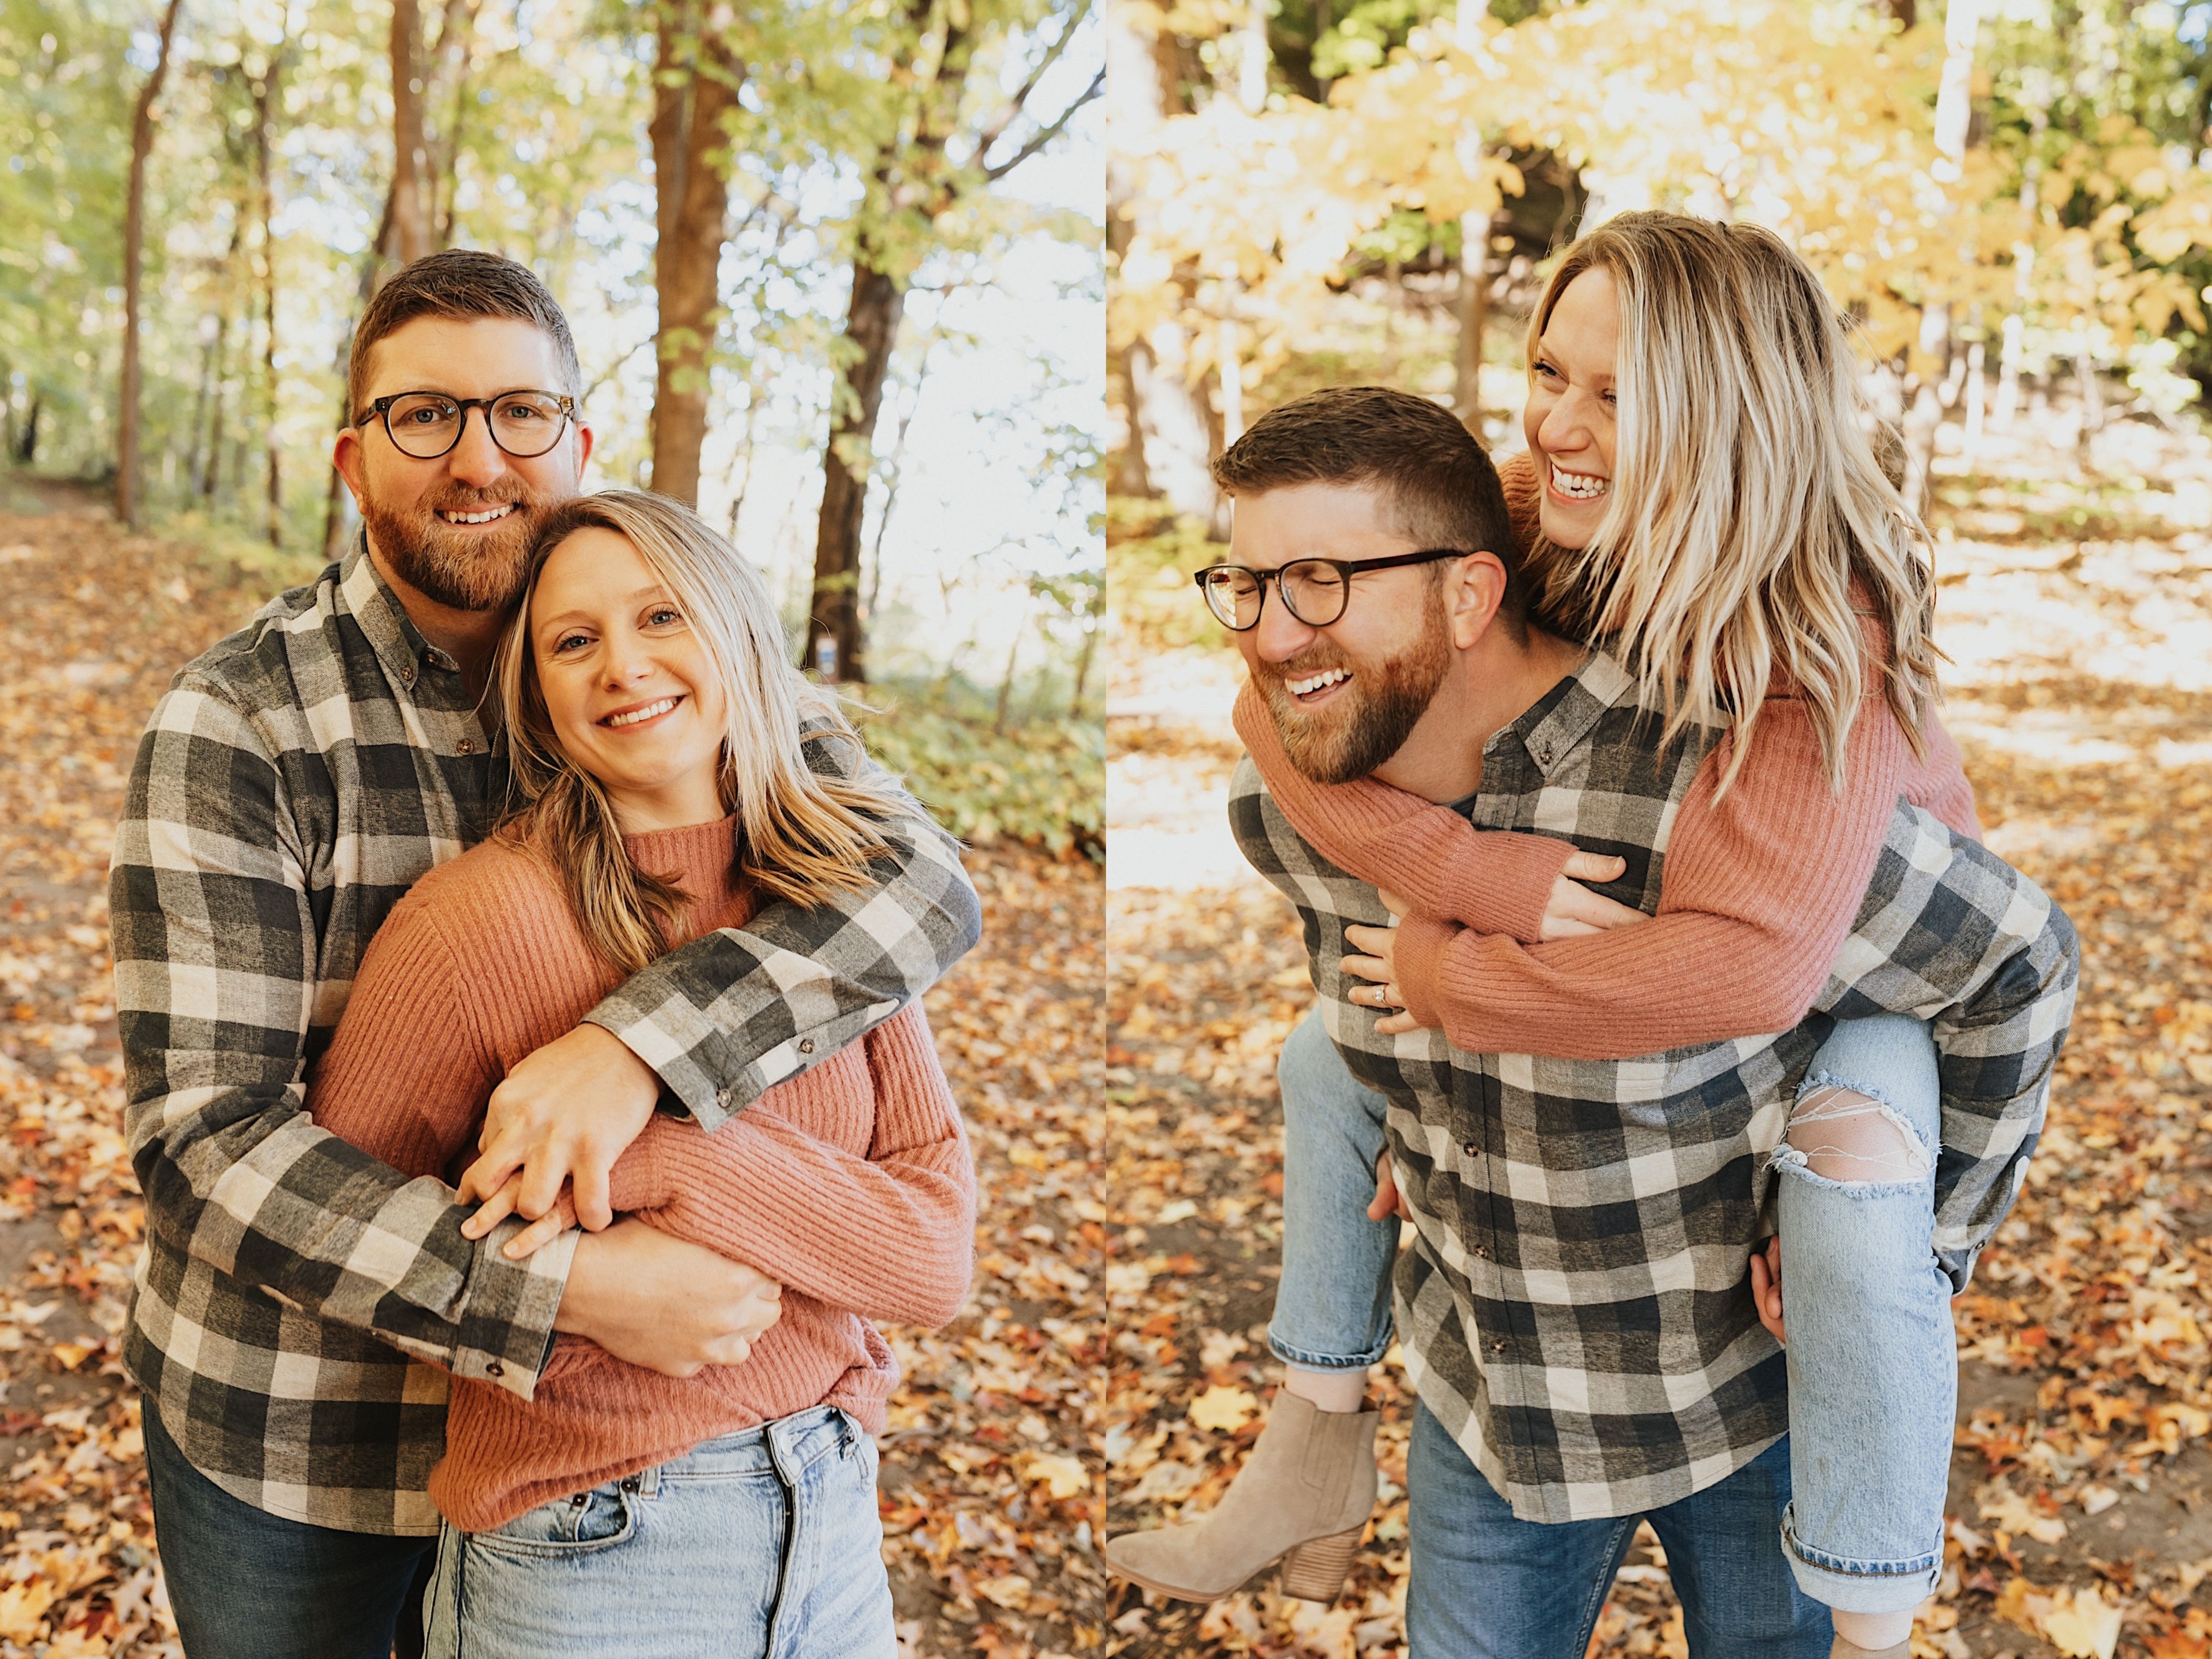 Two photos side by side, the left is of a man hugging a woman from behind as they both smile at the camera, the right is of the same couple and the woman is getting a piggyback ride from the man as they both smile to the left, both photos were taken on a leaf covered trail in the forest in the fall